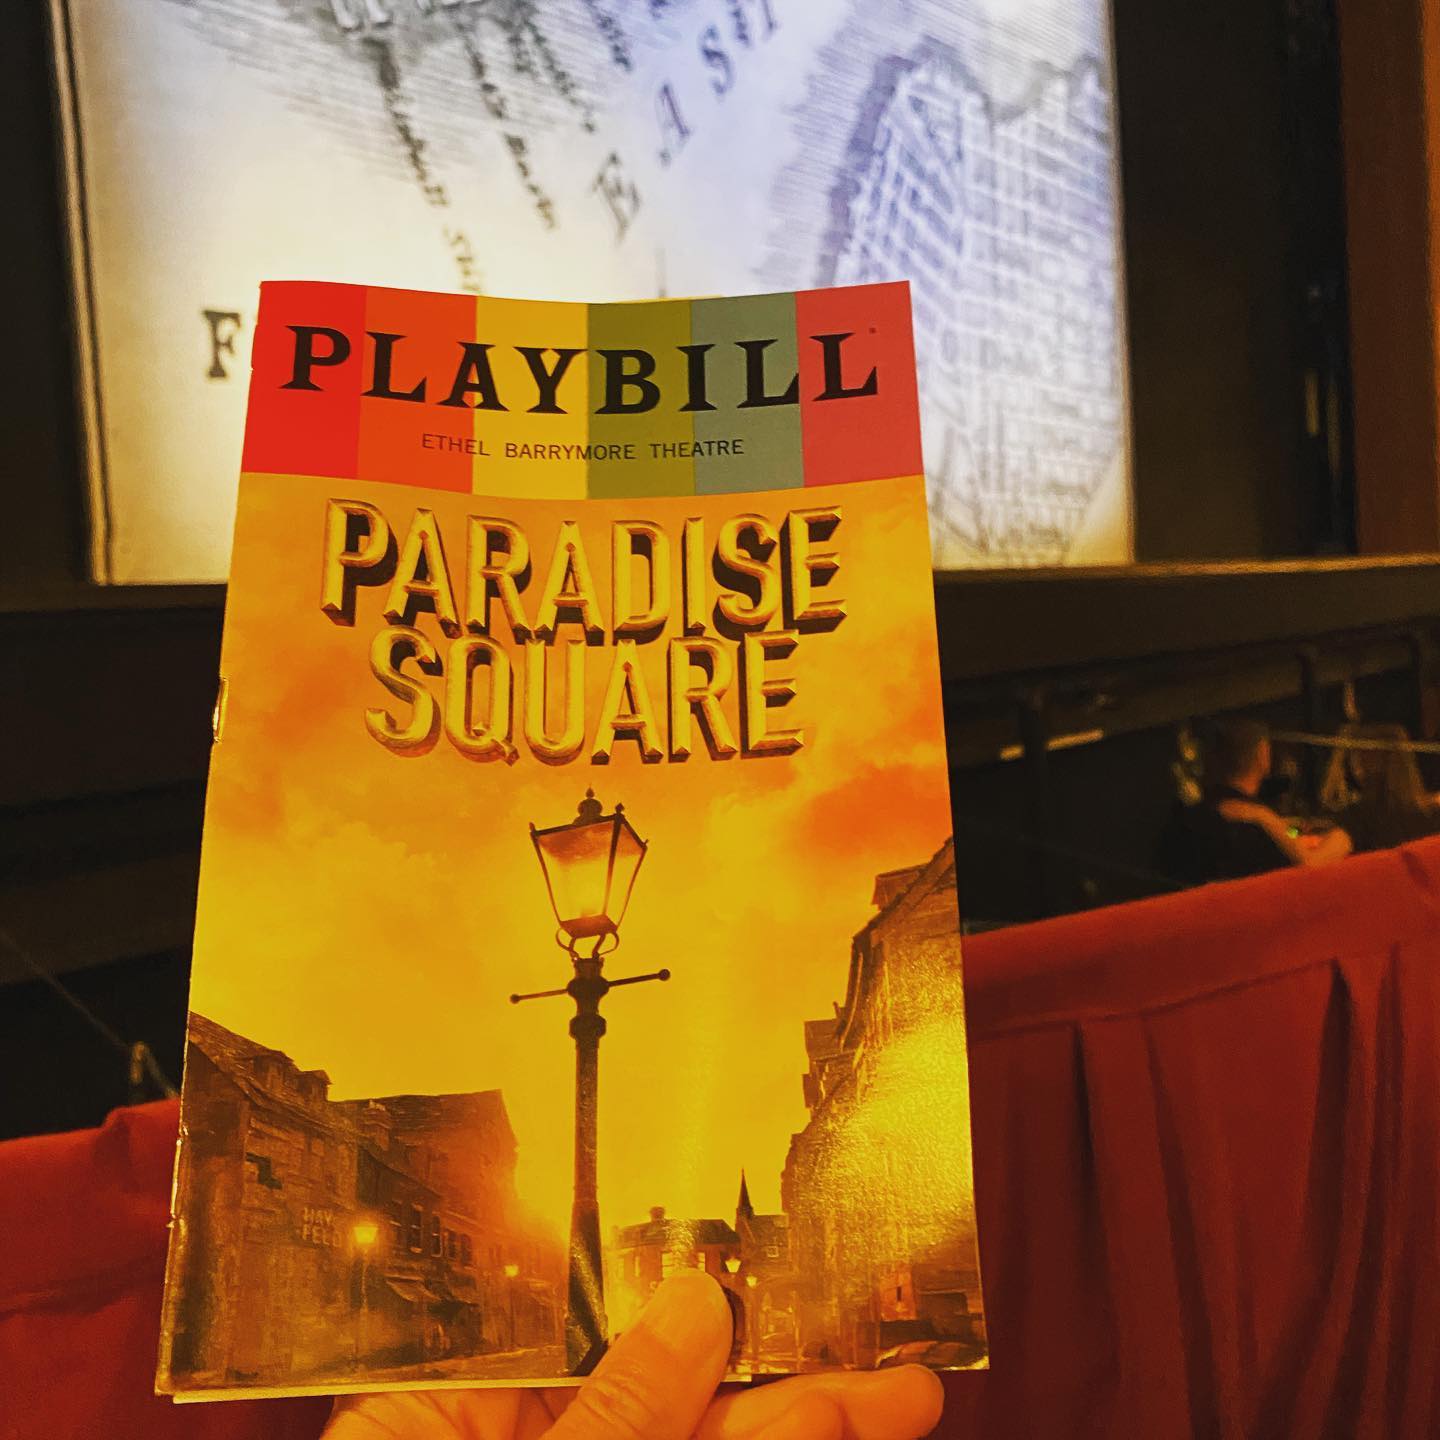 Took in @paradisesquarebway before the Tonys. So I got to see two performances of Let it Burn yesterday: standby @gifted2sing at the matinee and @joaquinakalukango on the Tonys just prior to her win. And may I say they were BOTH flat-out amazing!!! #broadwaymusical #elevenoclocknumber #broadway #tonywinningmusical #paradisesquaremusical #nyctheatre #lovemusicals